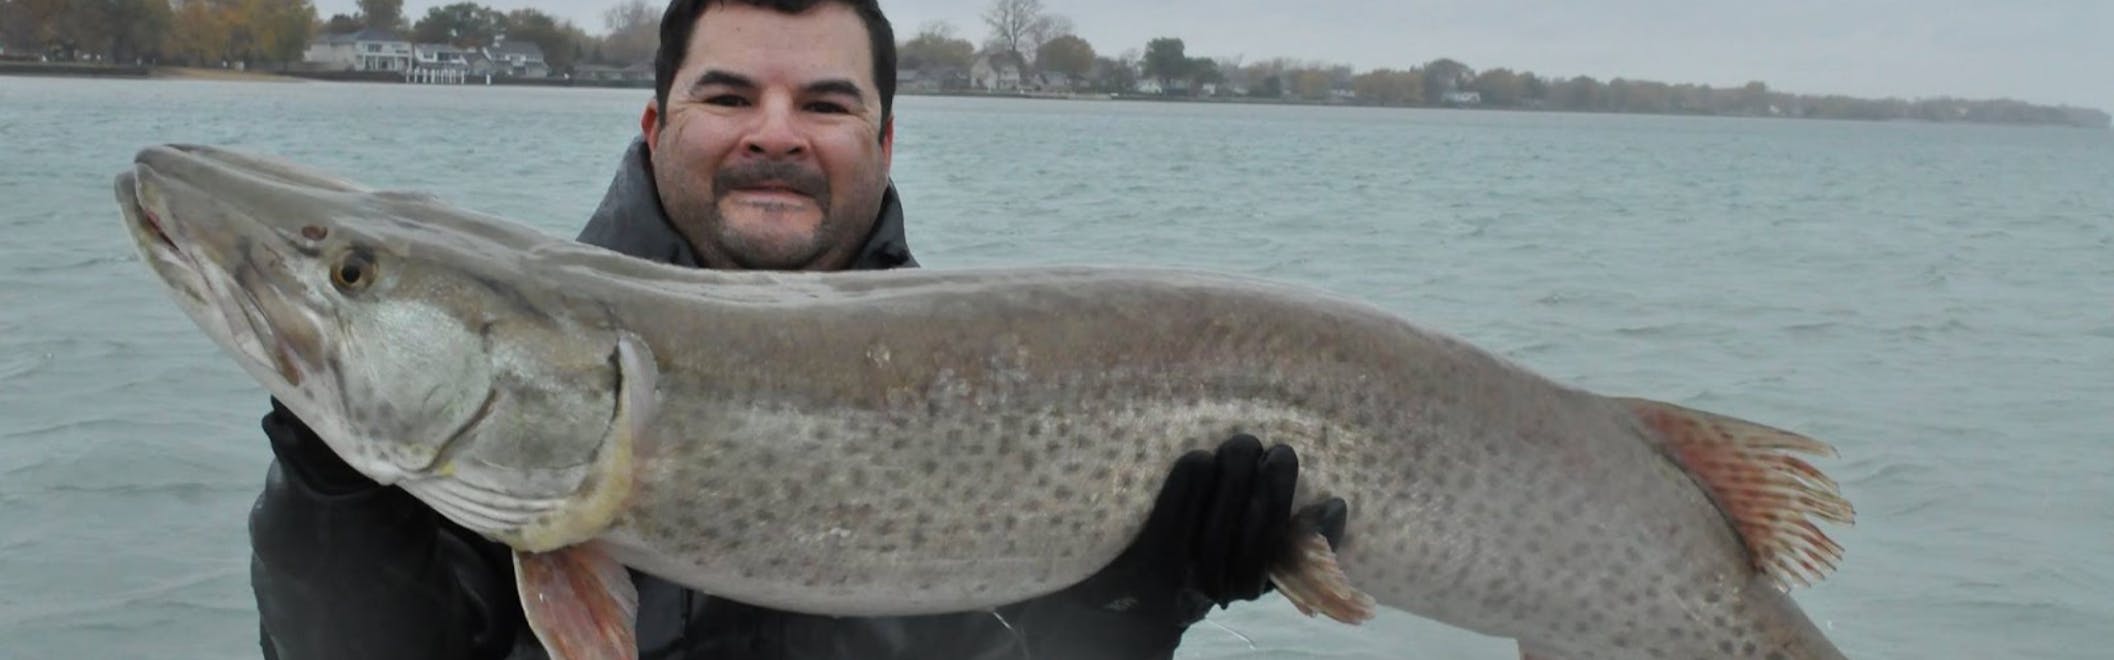 The author, a man with dark hair and a mustache, holds up a massive Muskie. It is at least 5 ft long.